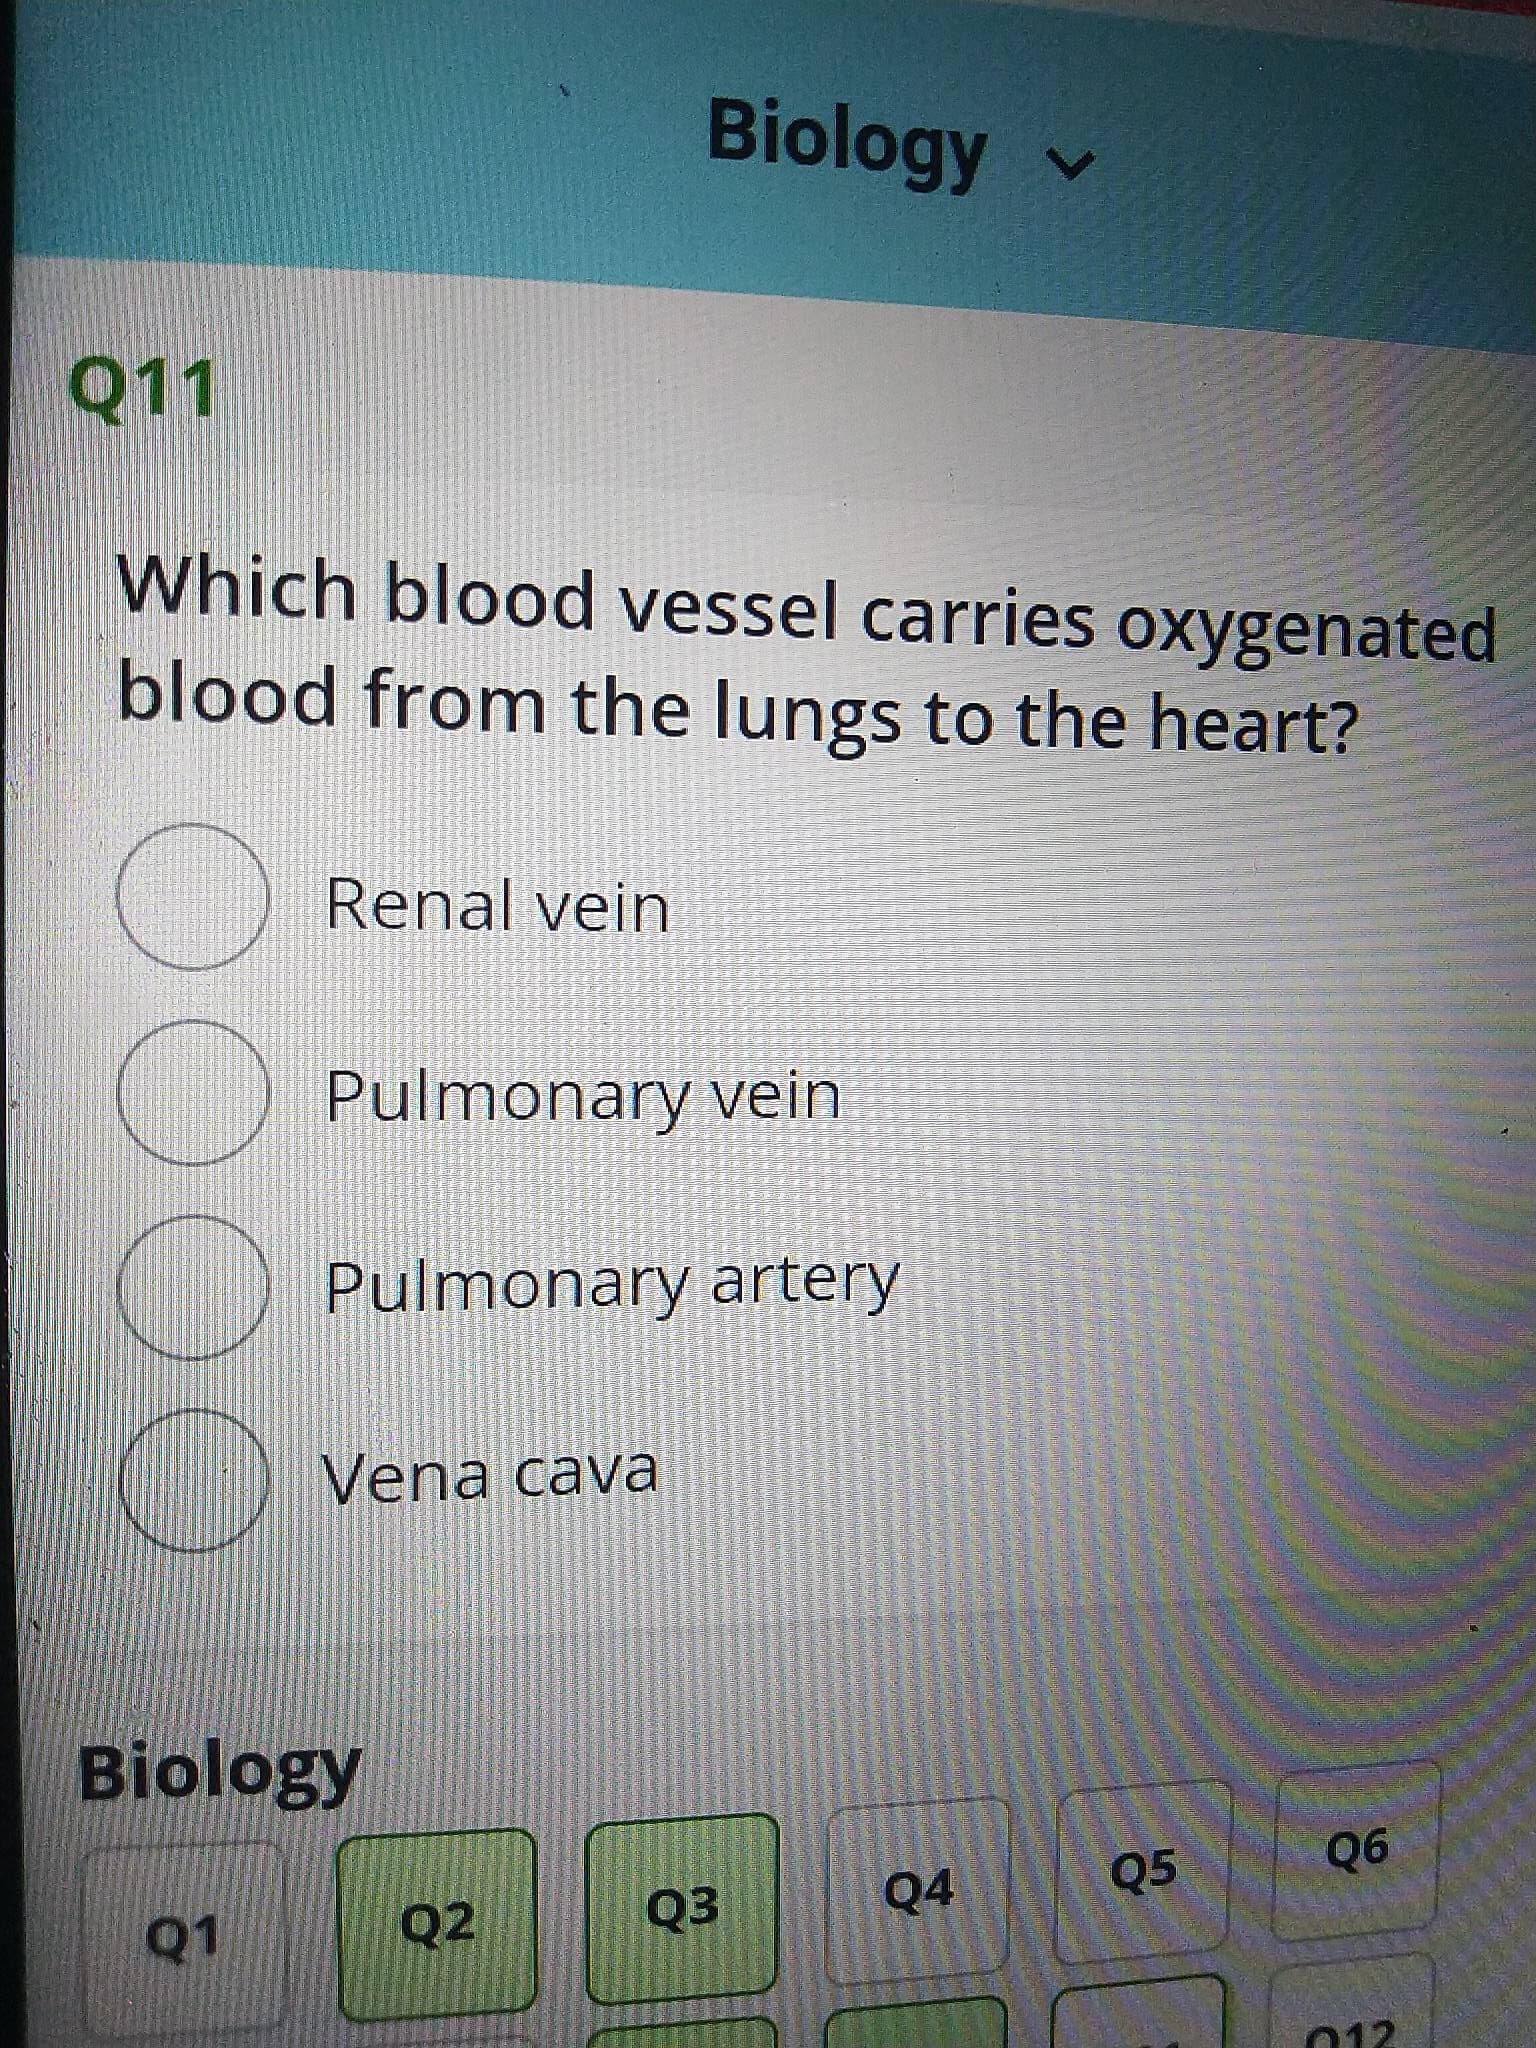 Biology
Which blood vessel carries oxygenated
blood from the lungs to the heart?
Renal vein
Pulmonary vein
Pulmonary artery
Vena cava
Biology
Q4
Q5
90
Q2
Q3
012
